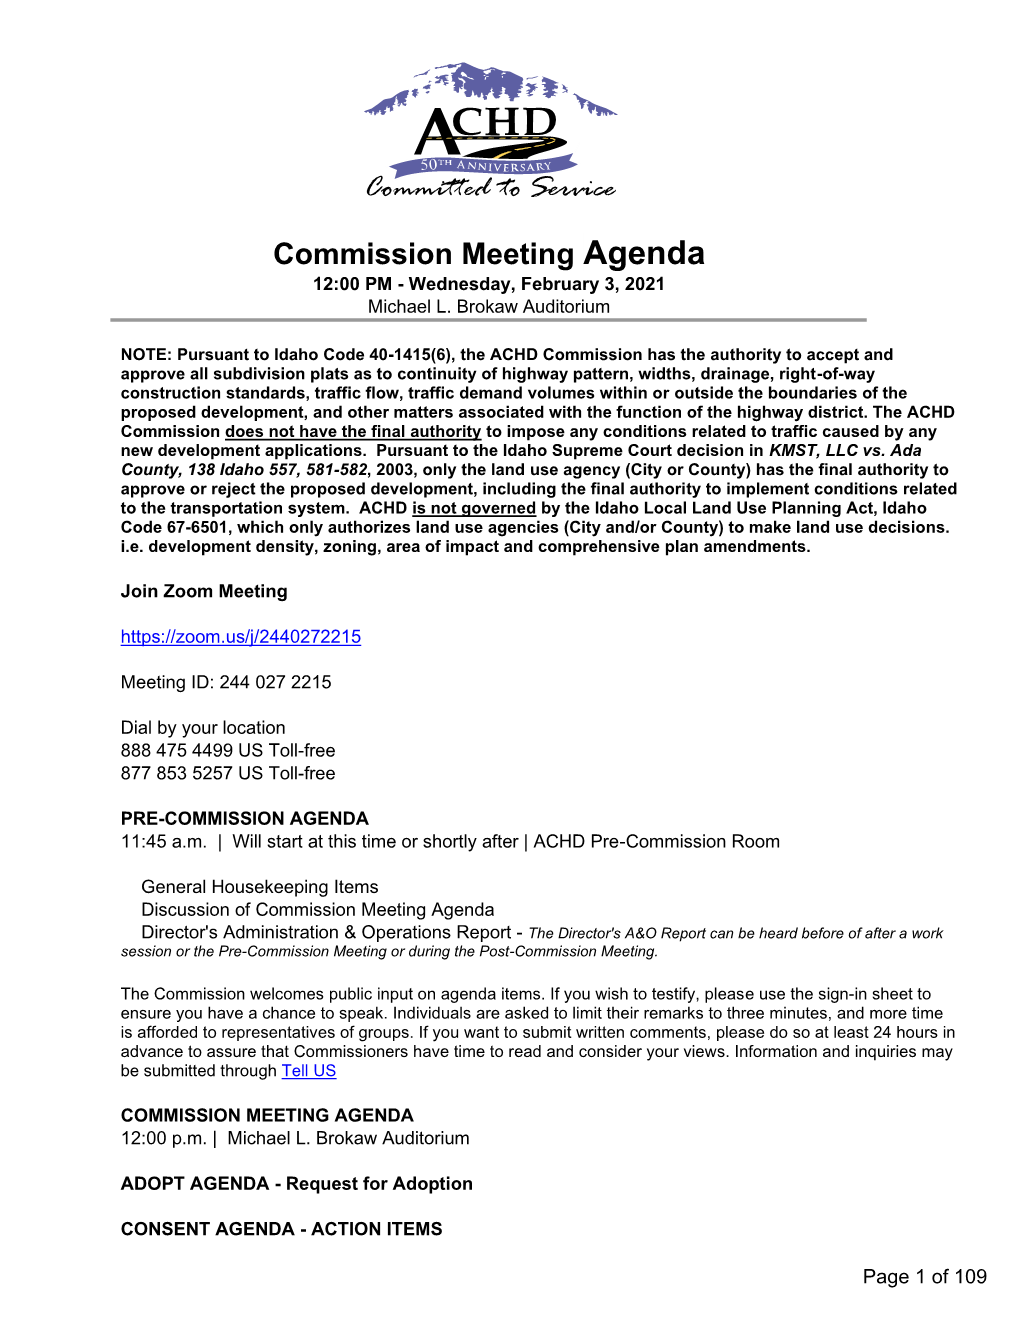 Commission Meeting Agenda 12:00 PM - Wednesday, February 3, 2021 Michael L